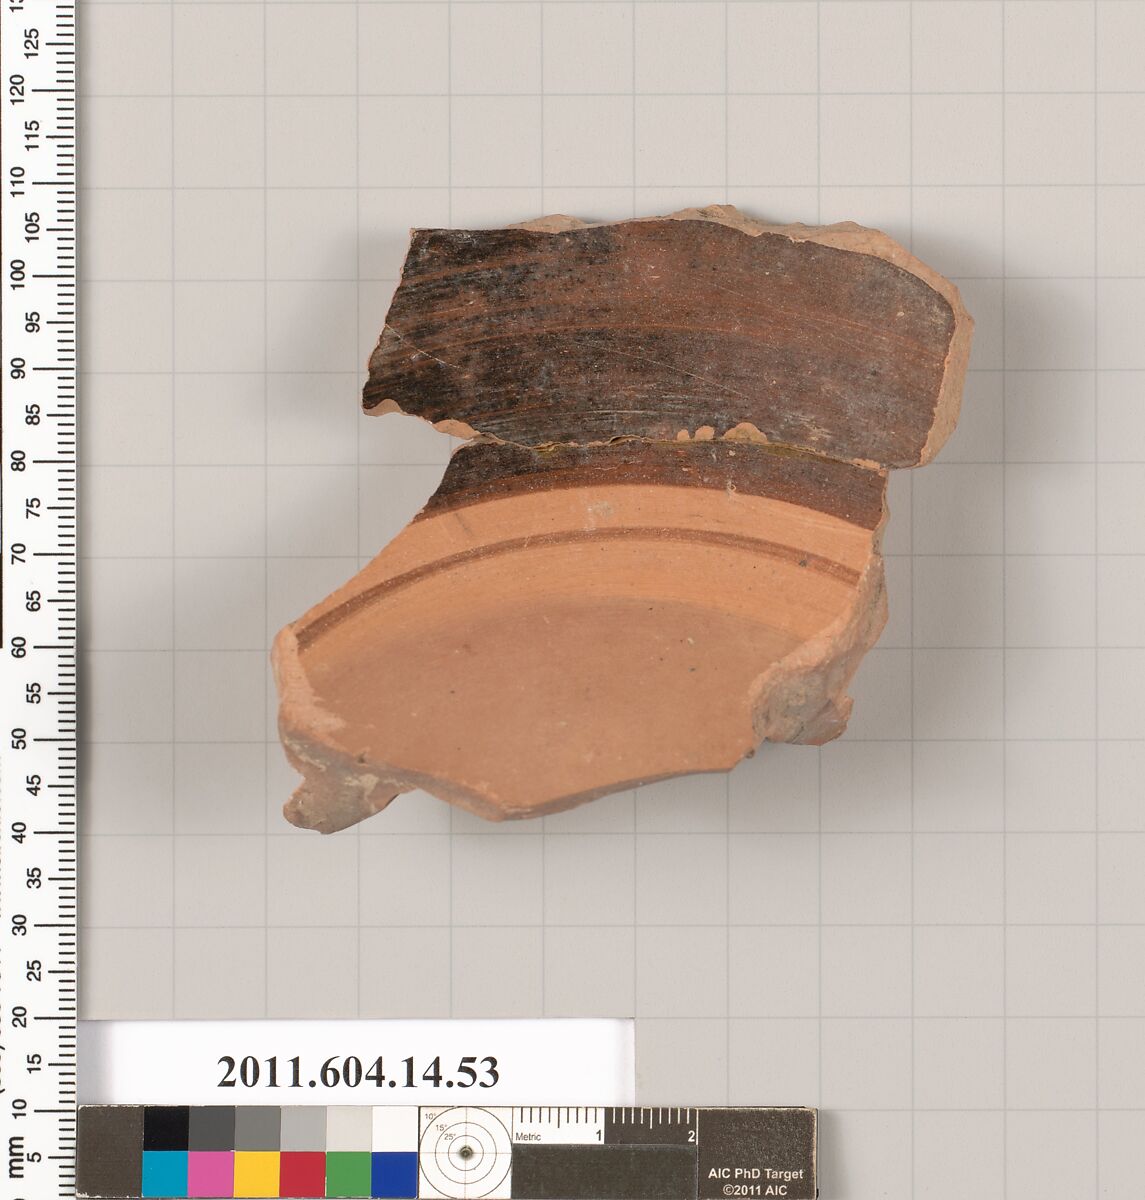 Terracotta fragment of a bowl, Terracotta, Unknown fabric 